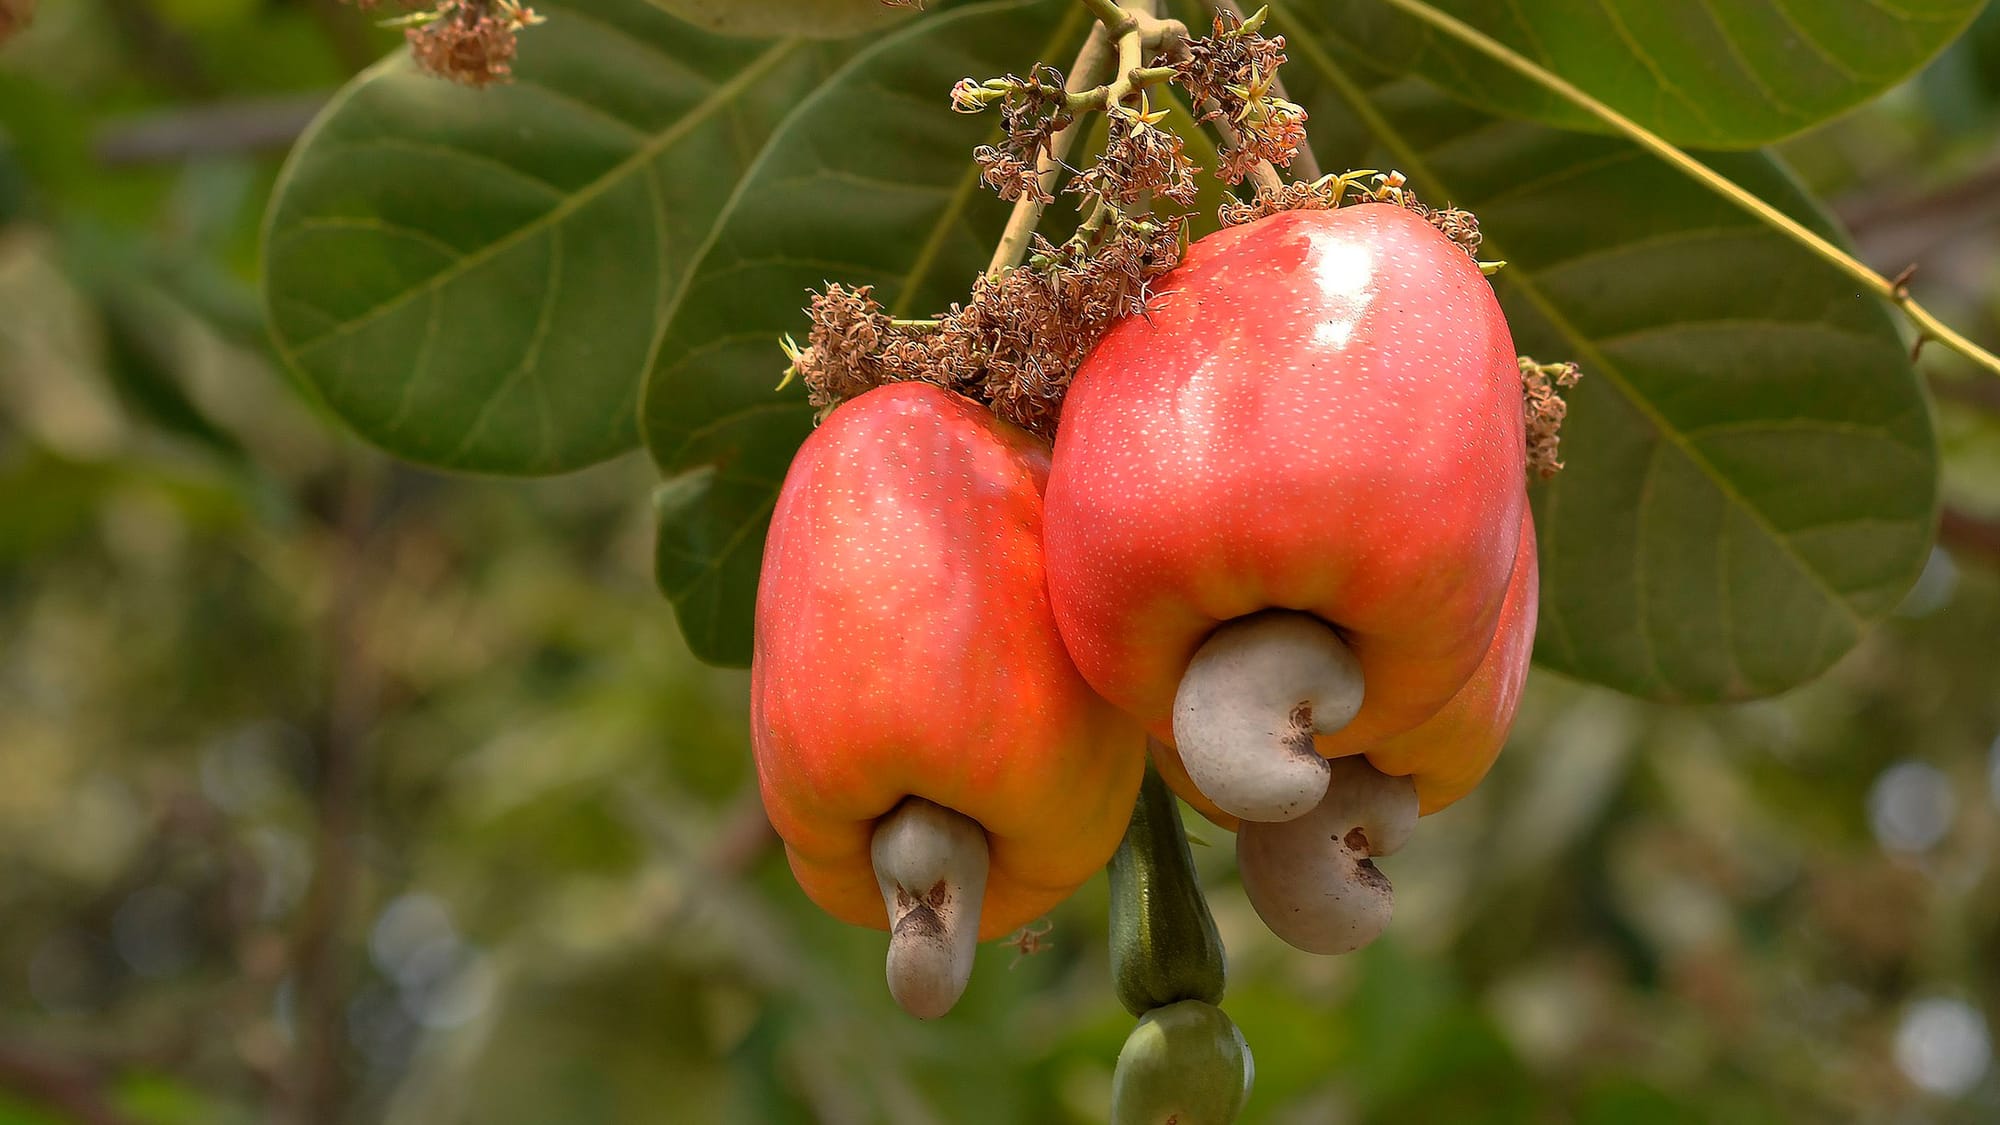 Three ripe, luscious looking red cashew fruits hanging amid the green leaves of a tree